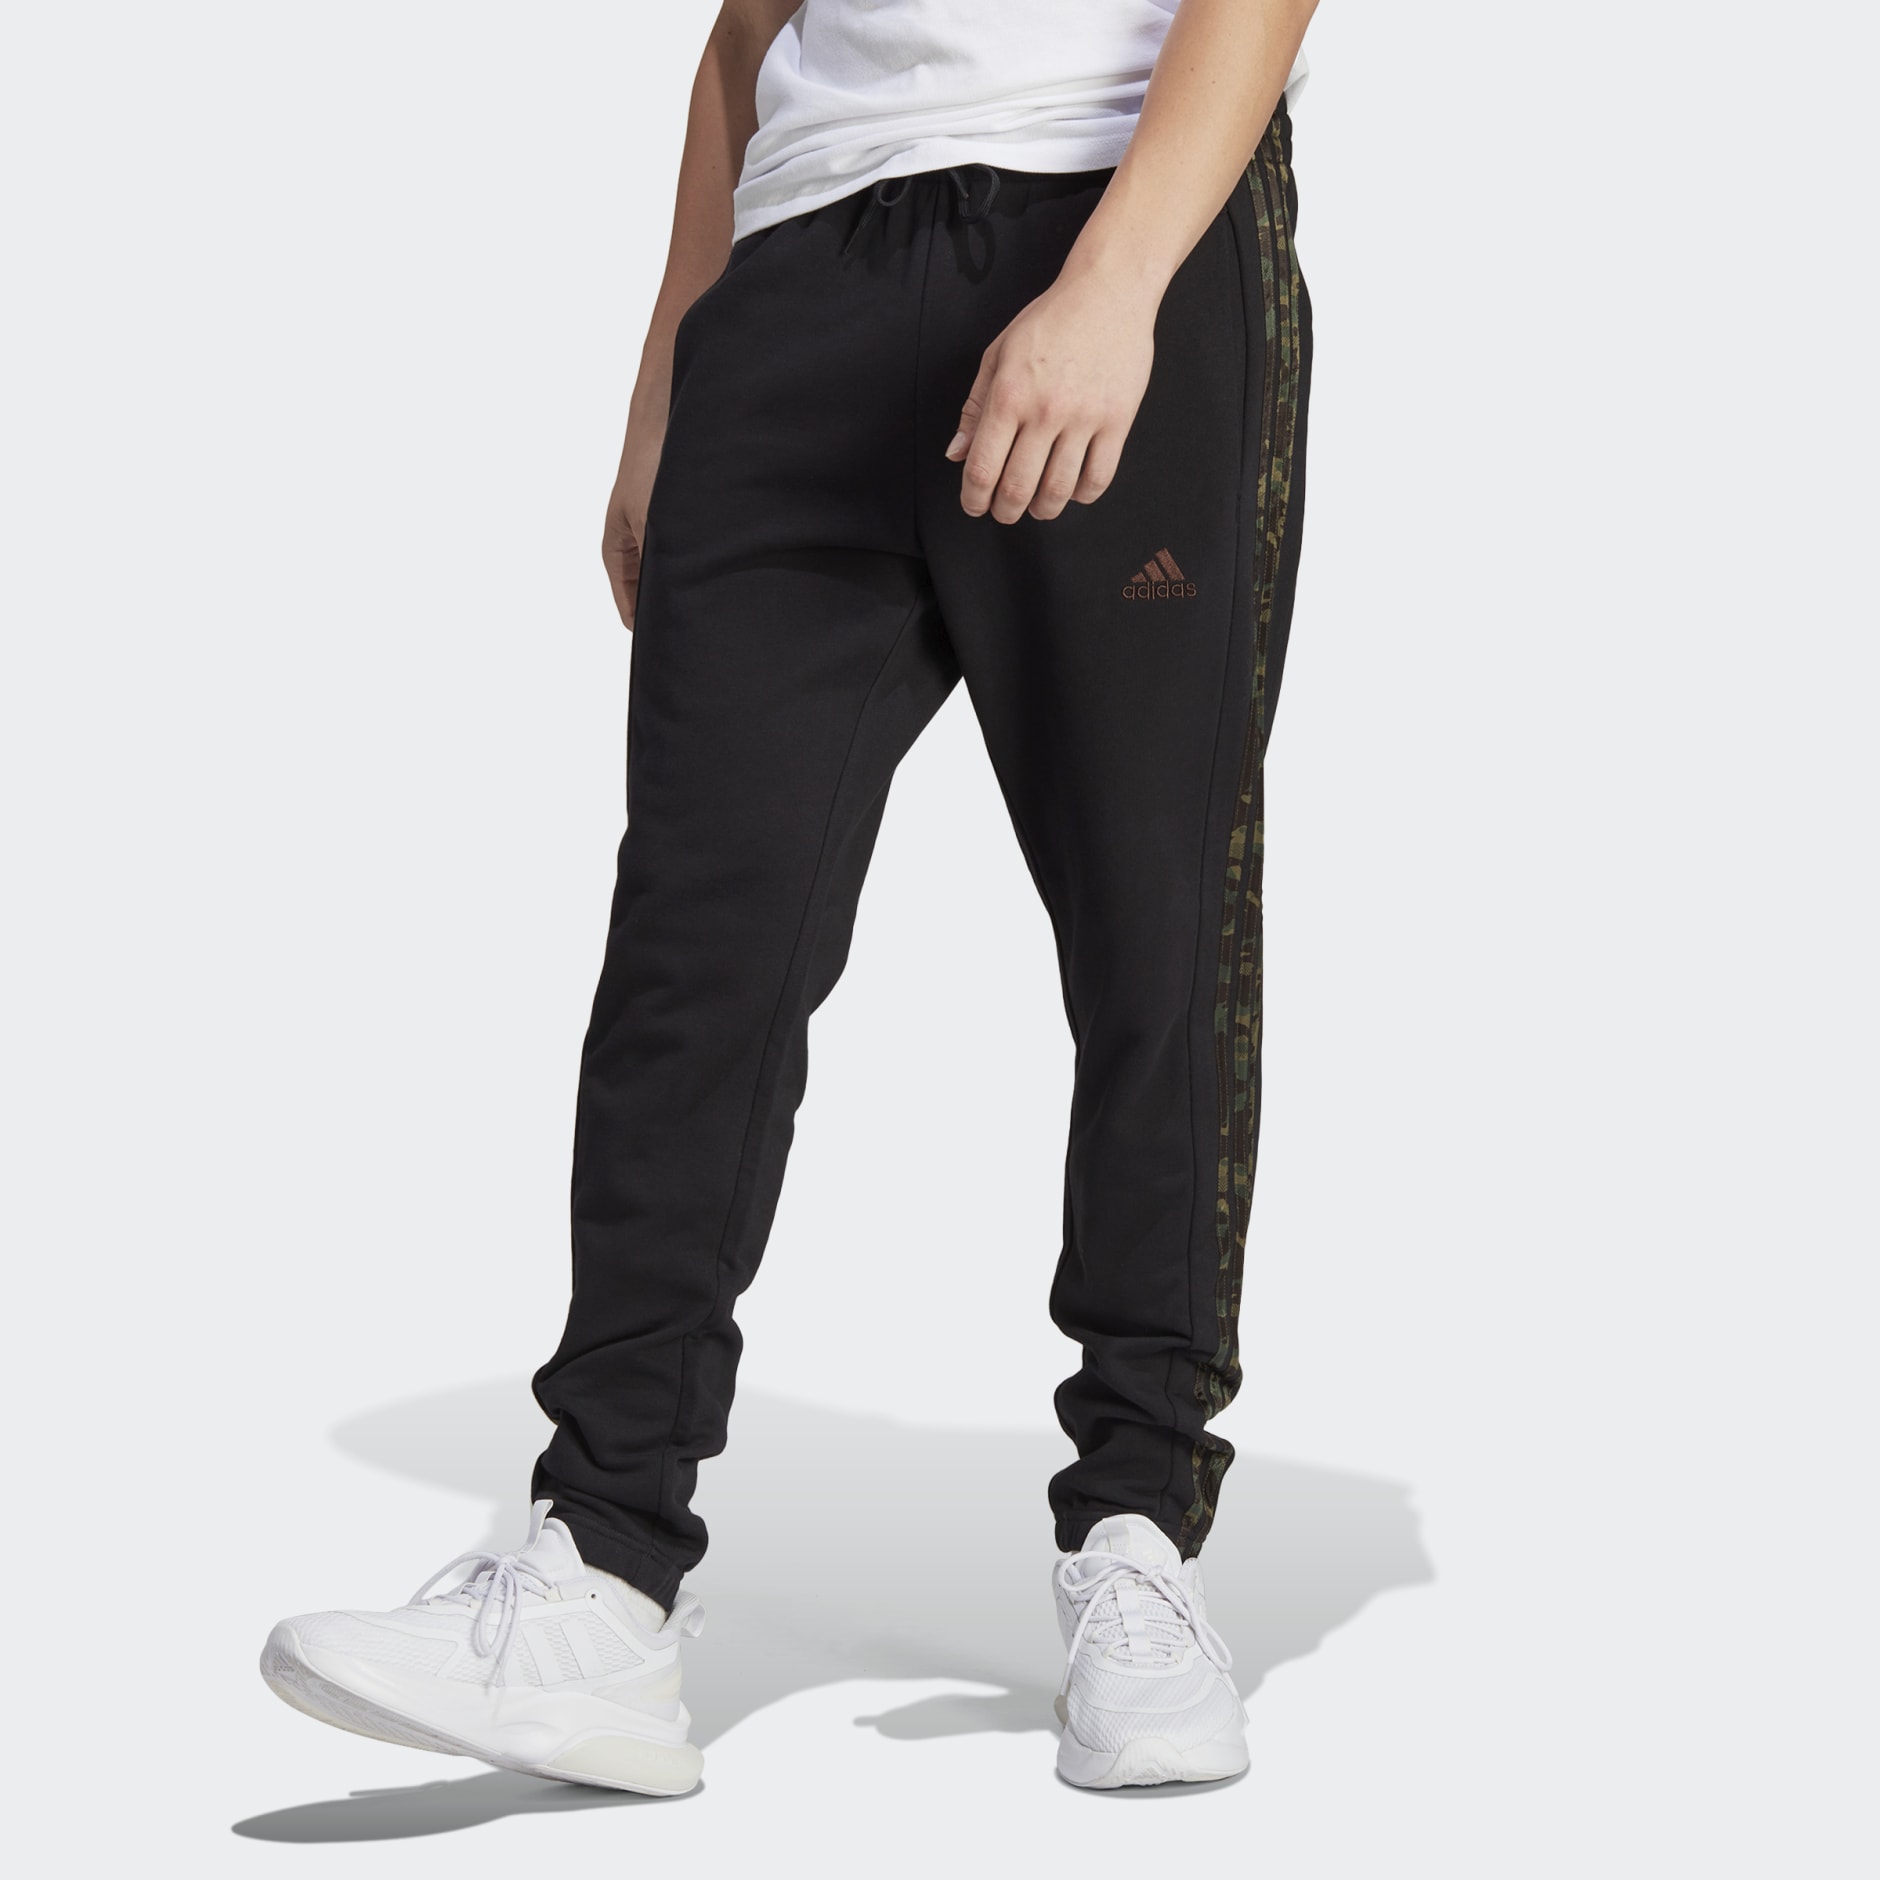 Pants 3-Stripes adidas Terry - French adidas Elastic Tapered Essentials Black | GH Cuff